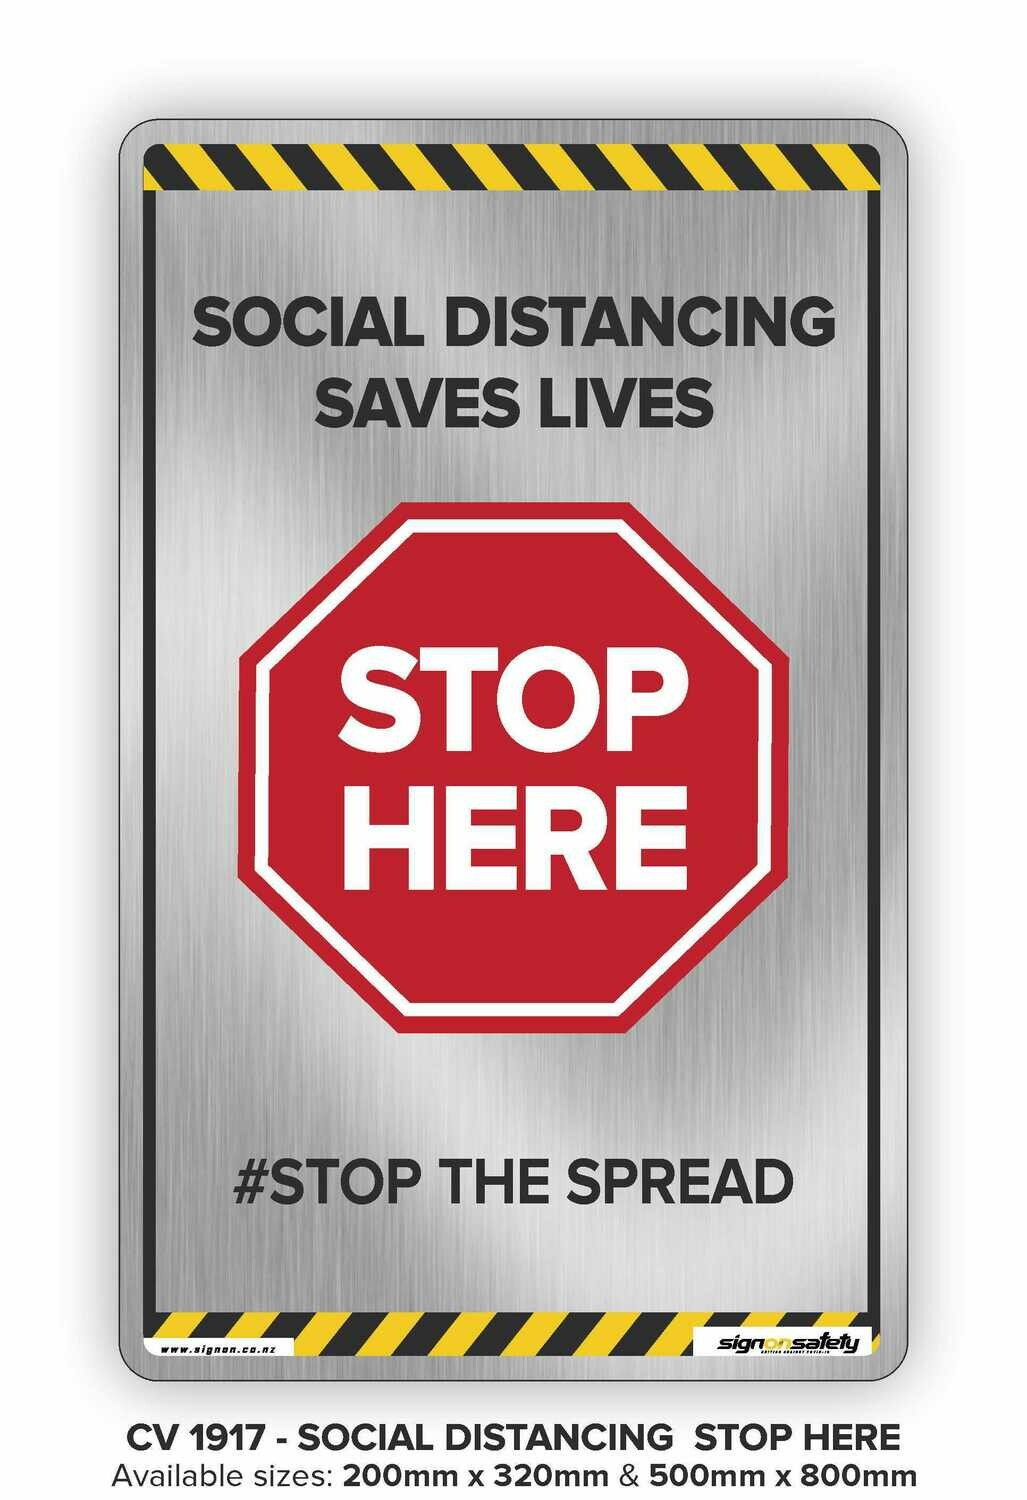 Stop Here -Social Distancing Saves